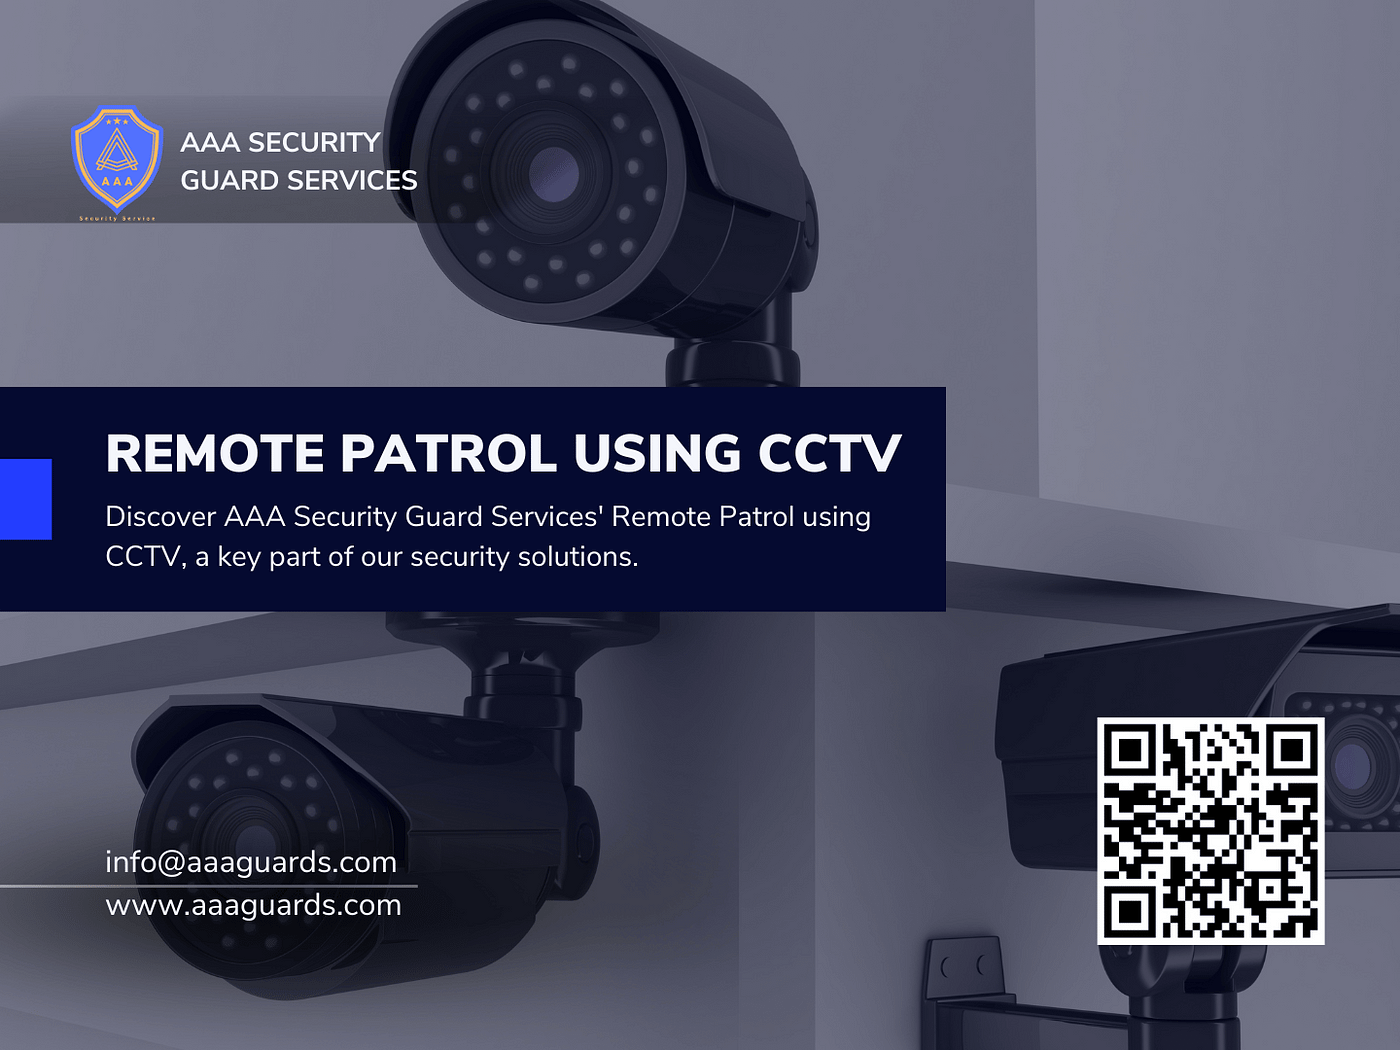 24/7 Surveillance: Benefits of CCTV Remote Patrol — AAA Security Guard  Services | by AAA Security Guard Services | Medium